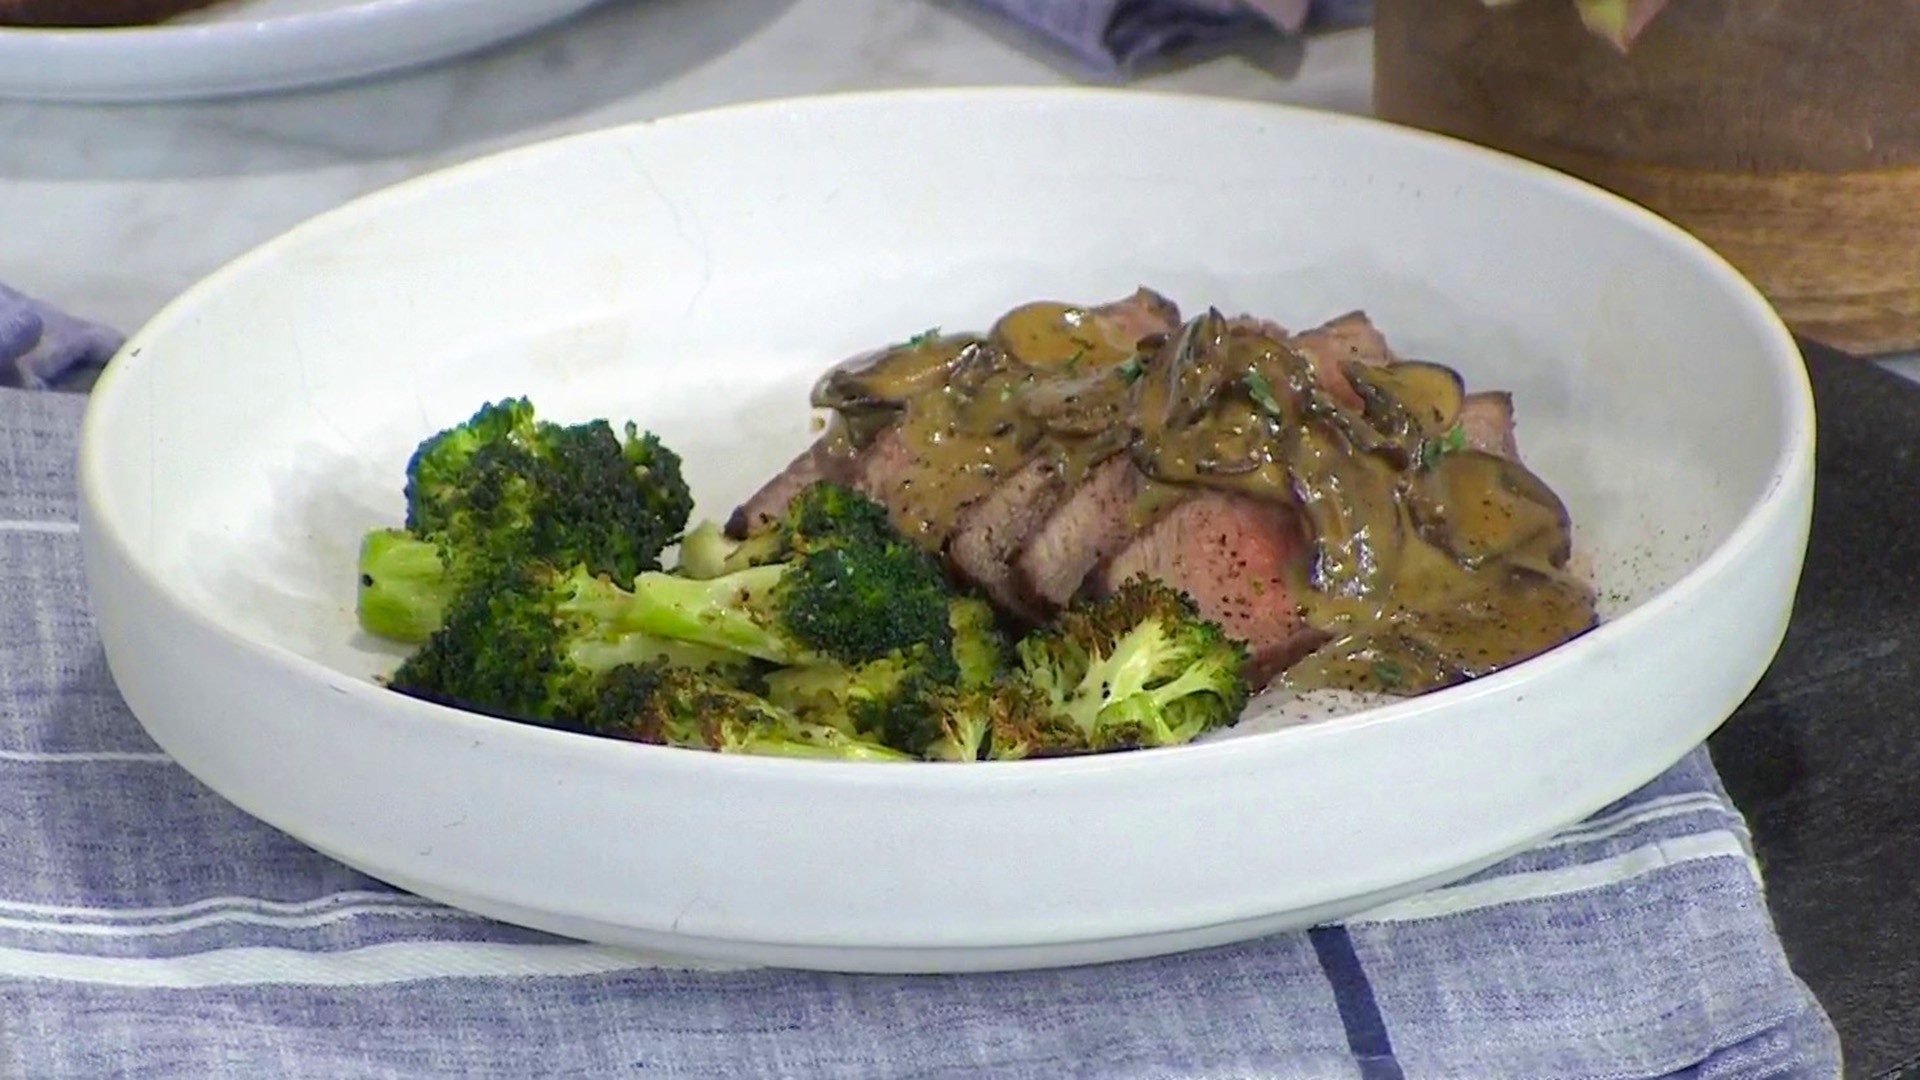 Try this simple recipe for a Southern spin on peppery steak Diane